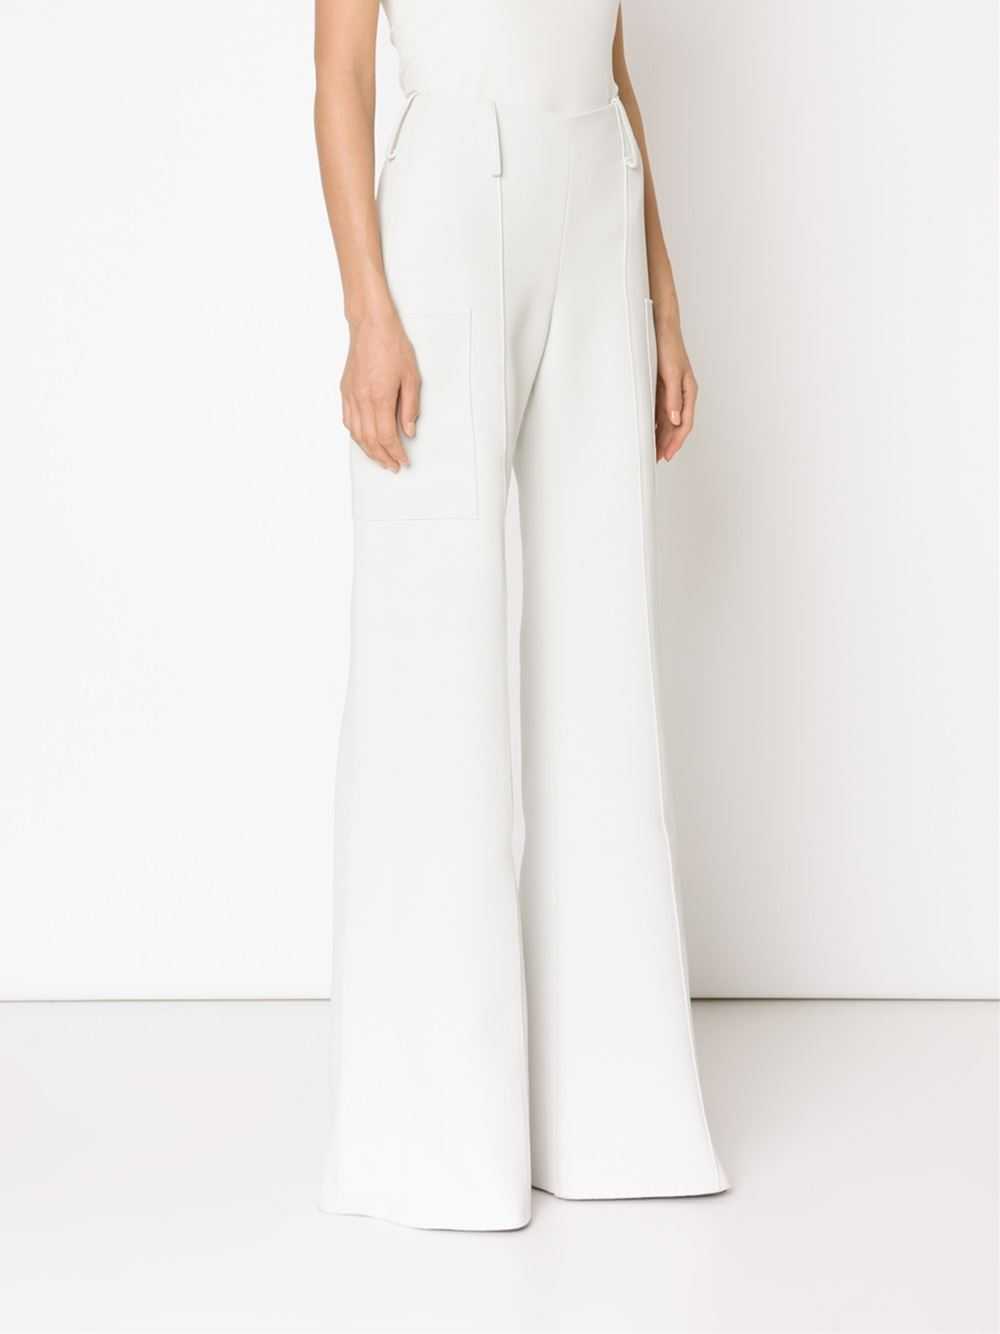 Hellessy High Waisted Flared Trousers in White - Lyst